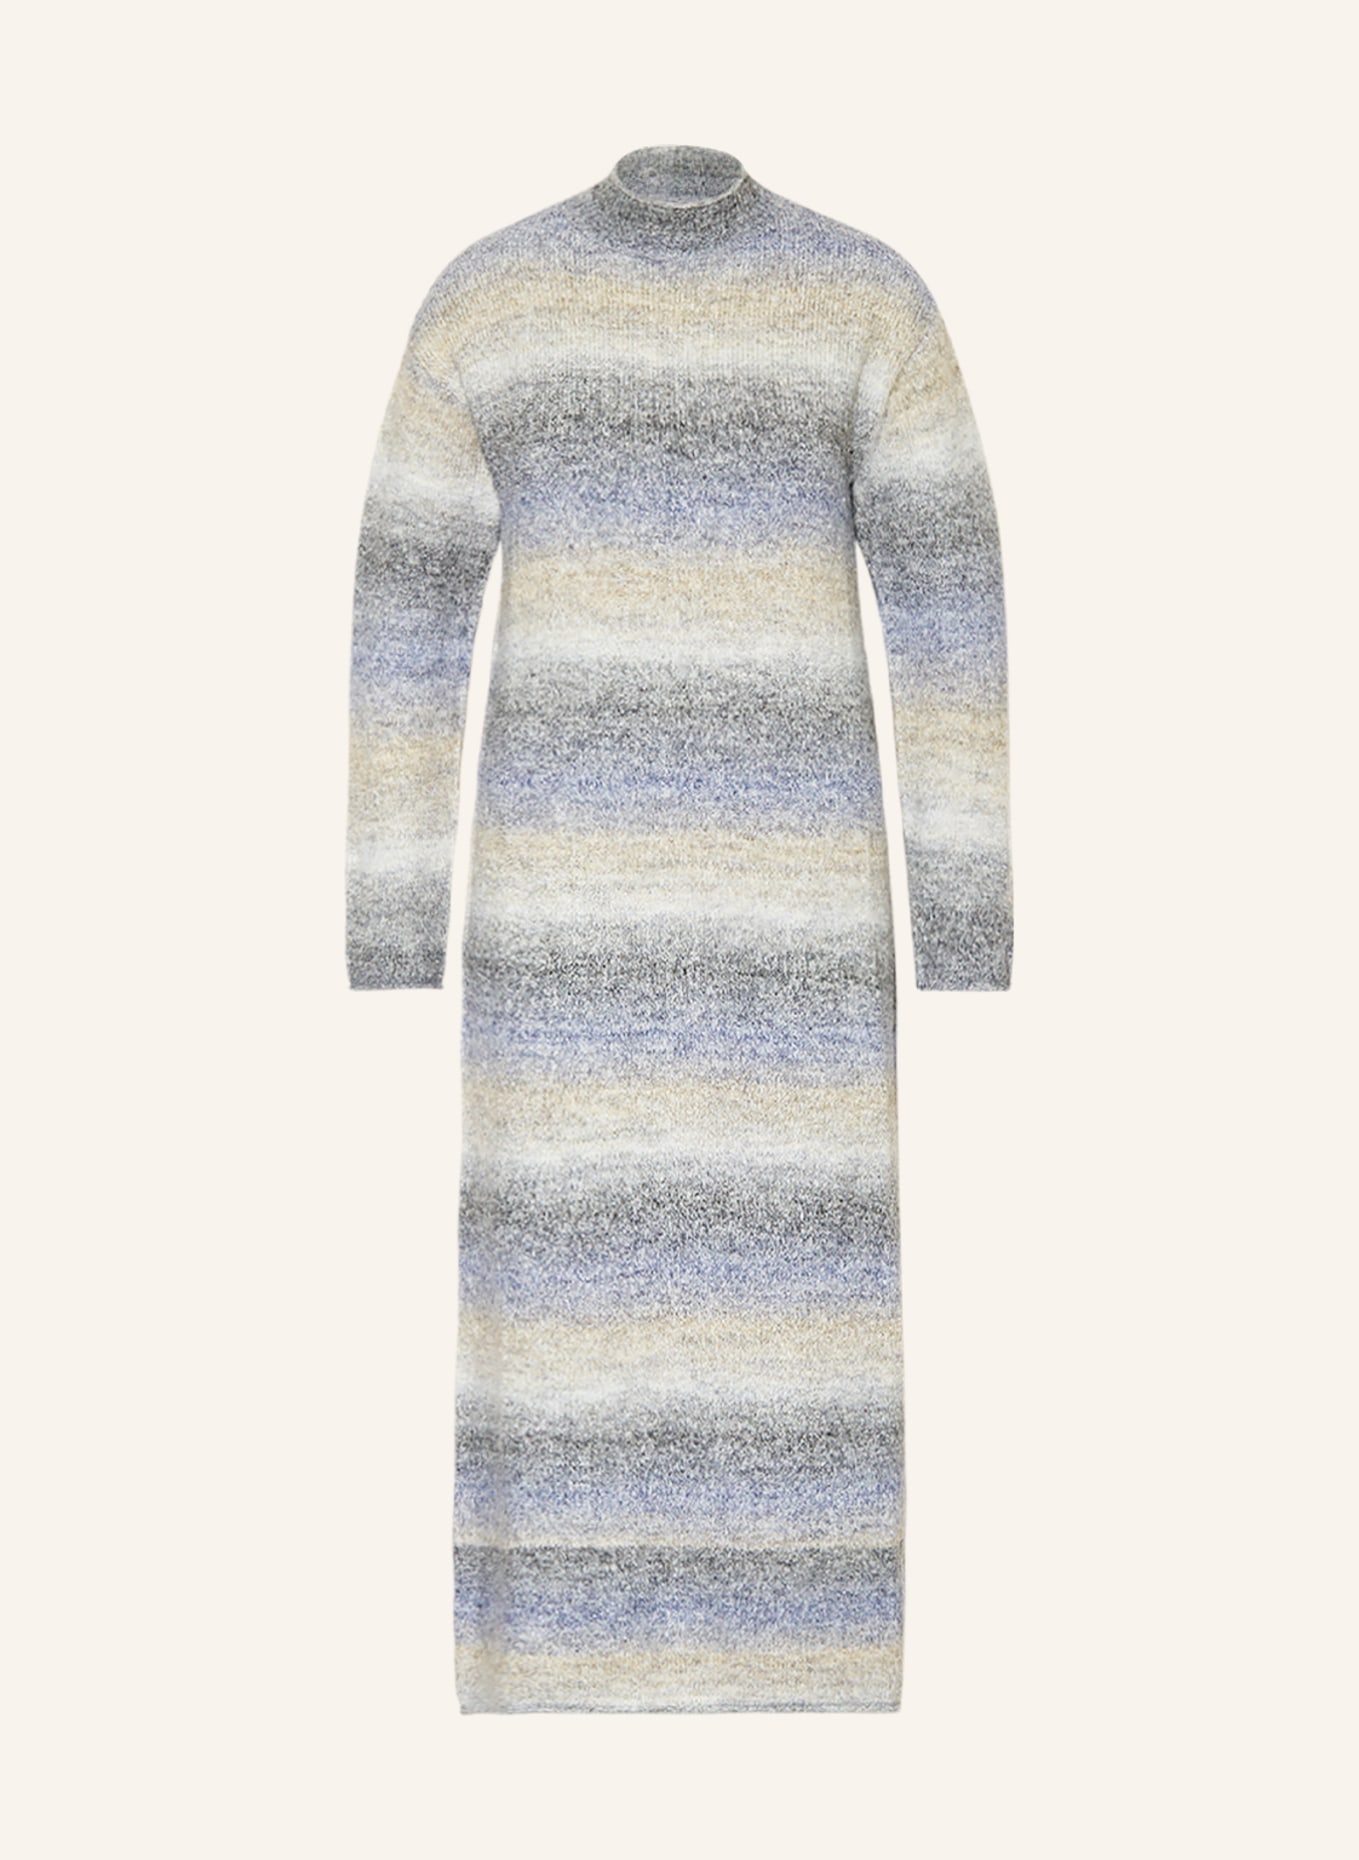 Pepe Jeans Knit dress EDITH, Color: BLUE GRAY/ LIGHT GRAY/ GRAY (Image 1)